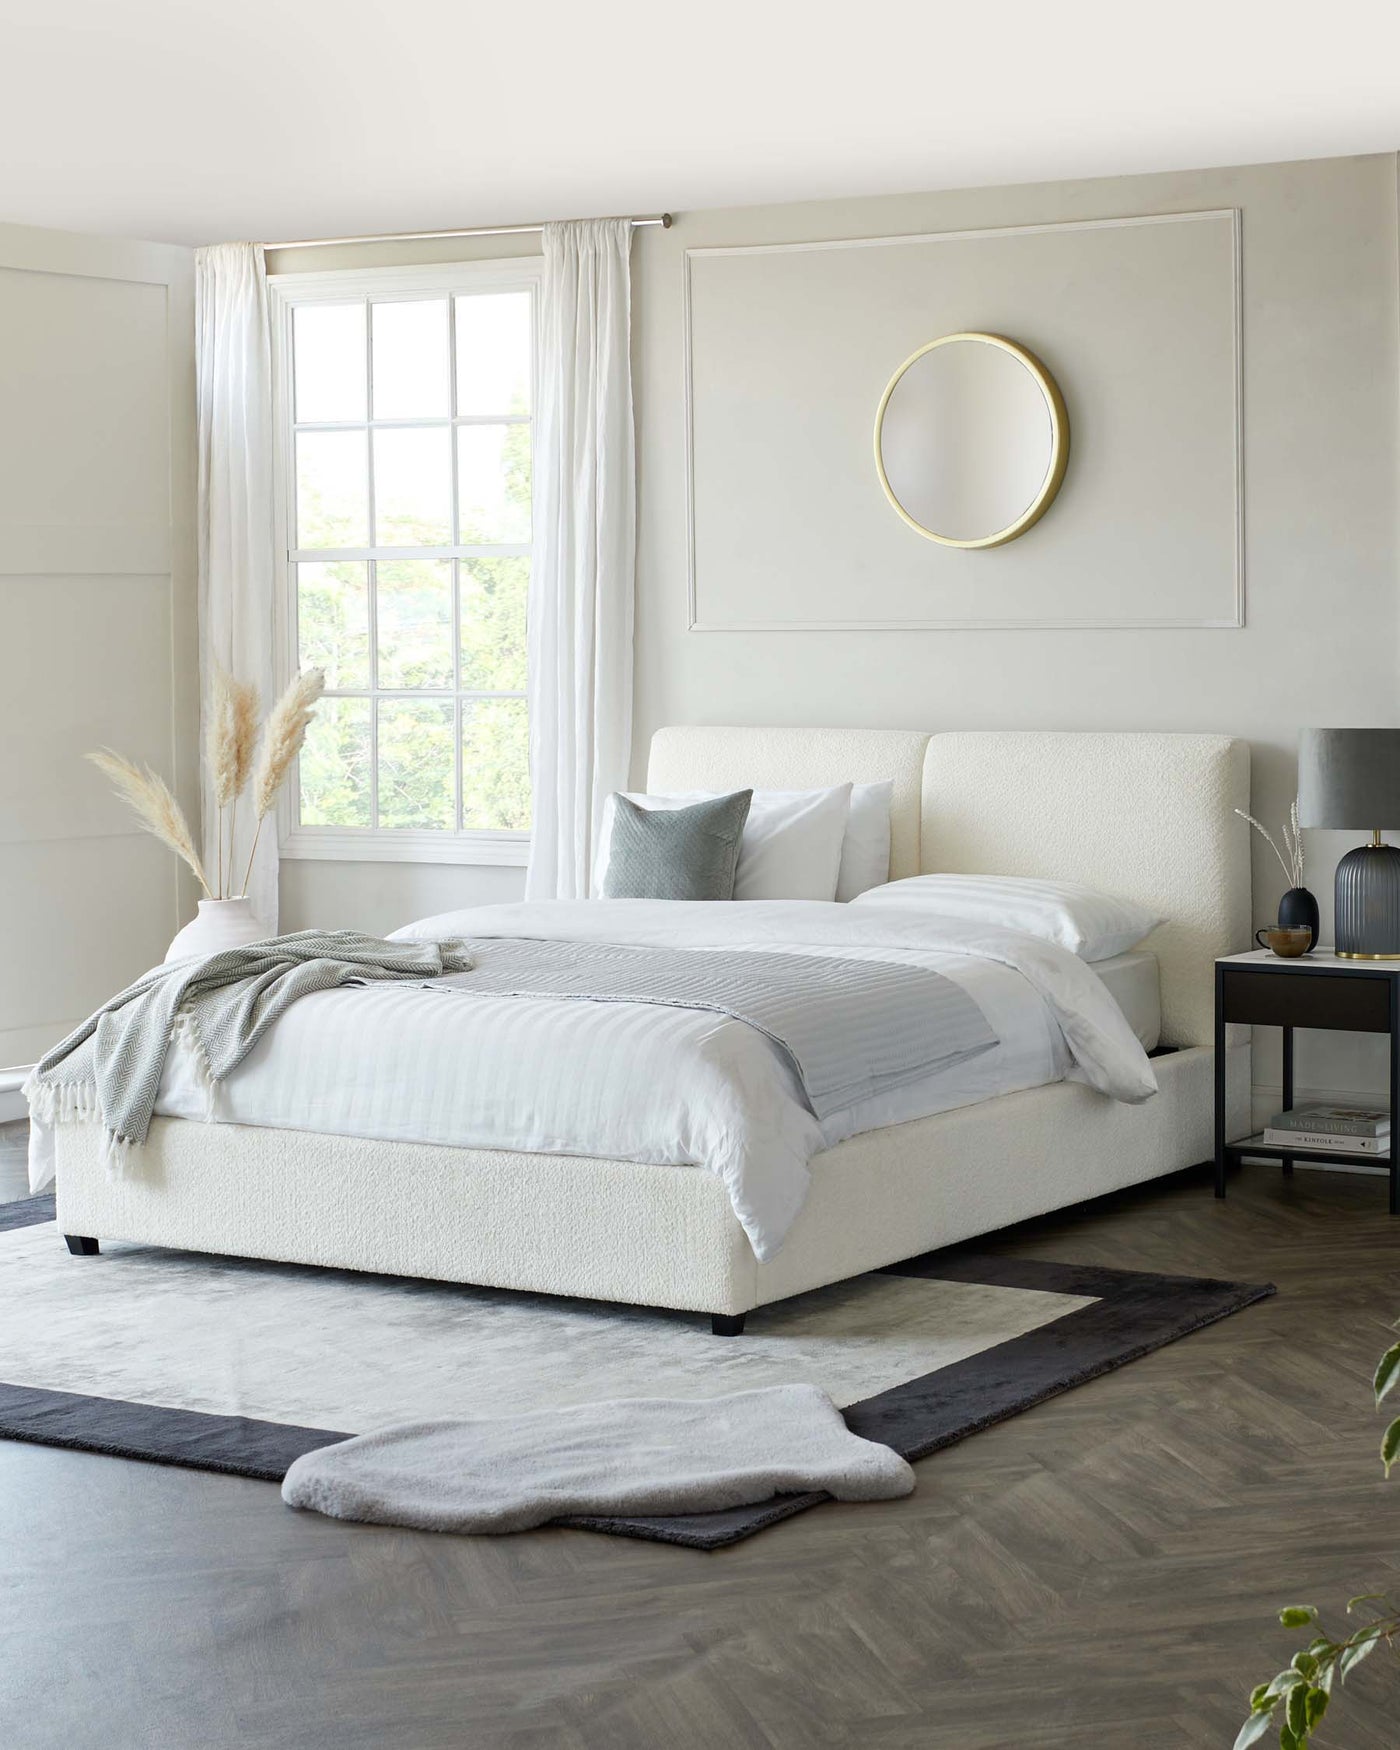 Modern minimalist bedroom featuring a large king-sized bed with a textured white headboard and a white and grey bedding set. A simple, round gold-framed mirror hangs above the bed. To the right, there is a sleek two-drawer nightstand with a grey lamp and books, showcasing a balance of aesthetics and functionality. The room is complemented by a layering of two area rugs beneath the bed, adding texture and warmth to the space.